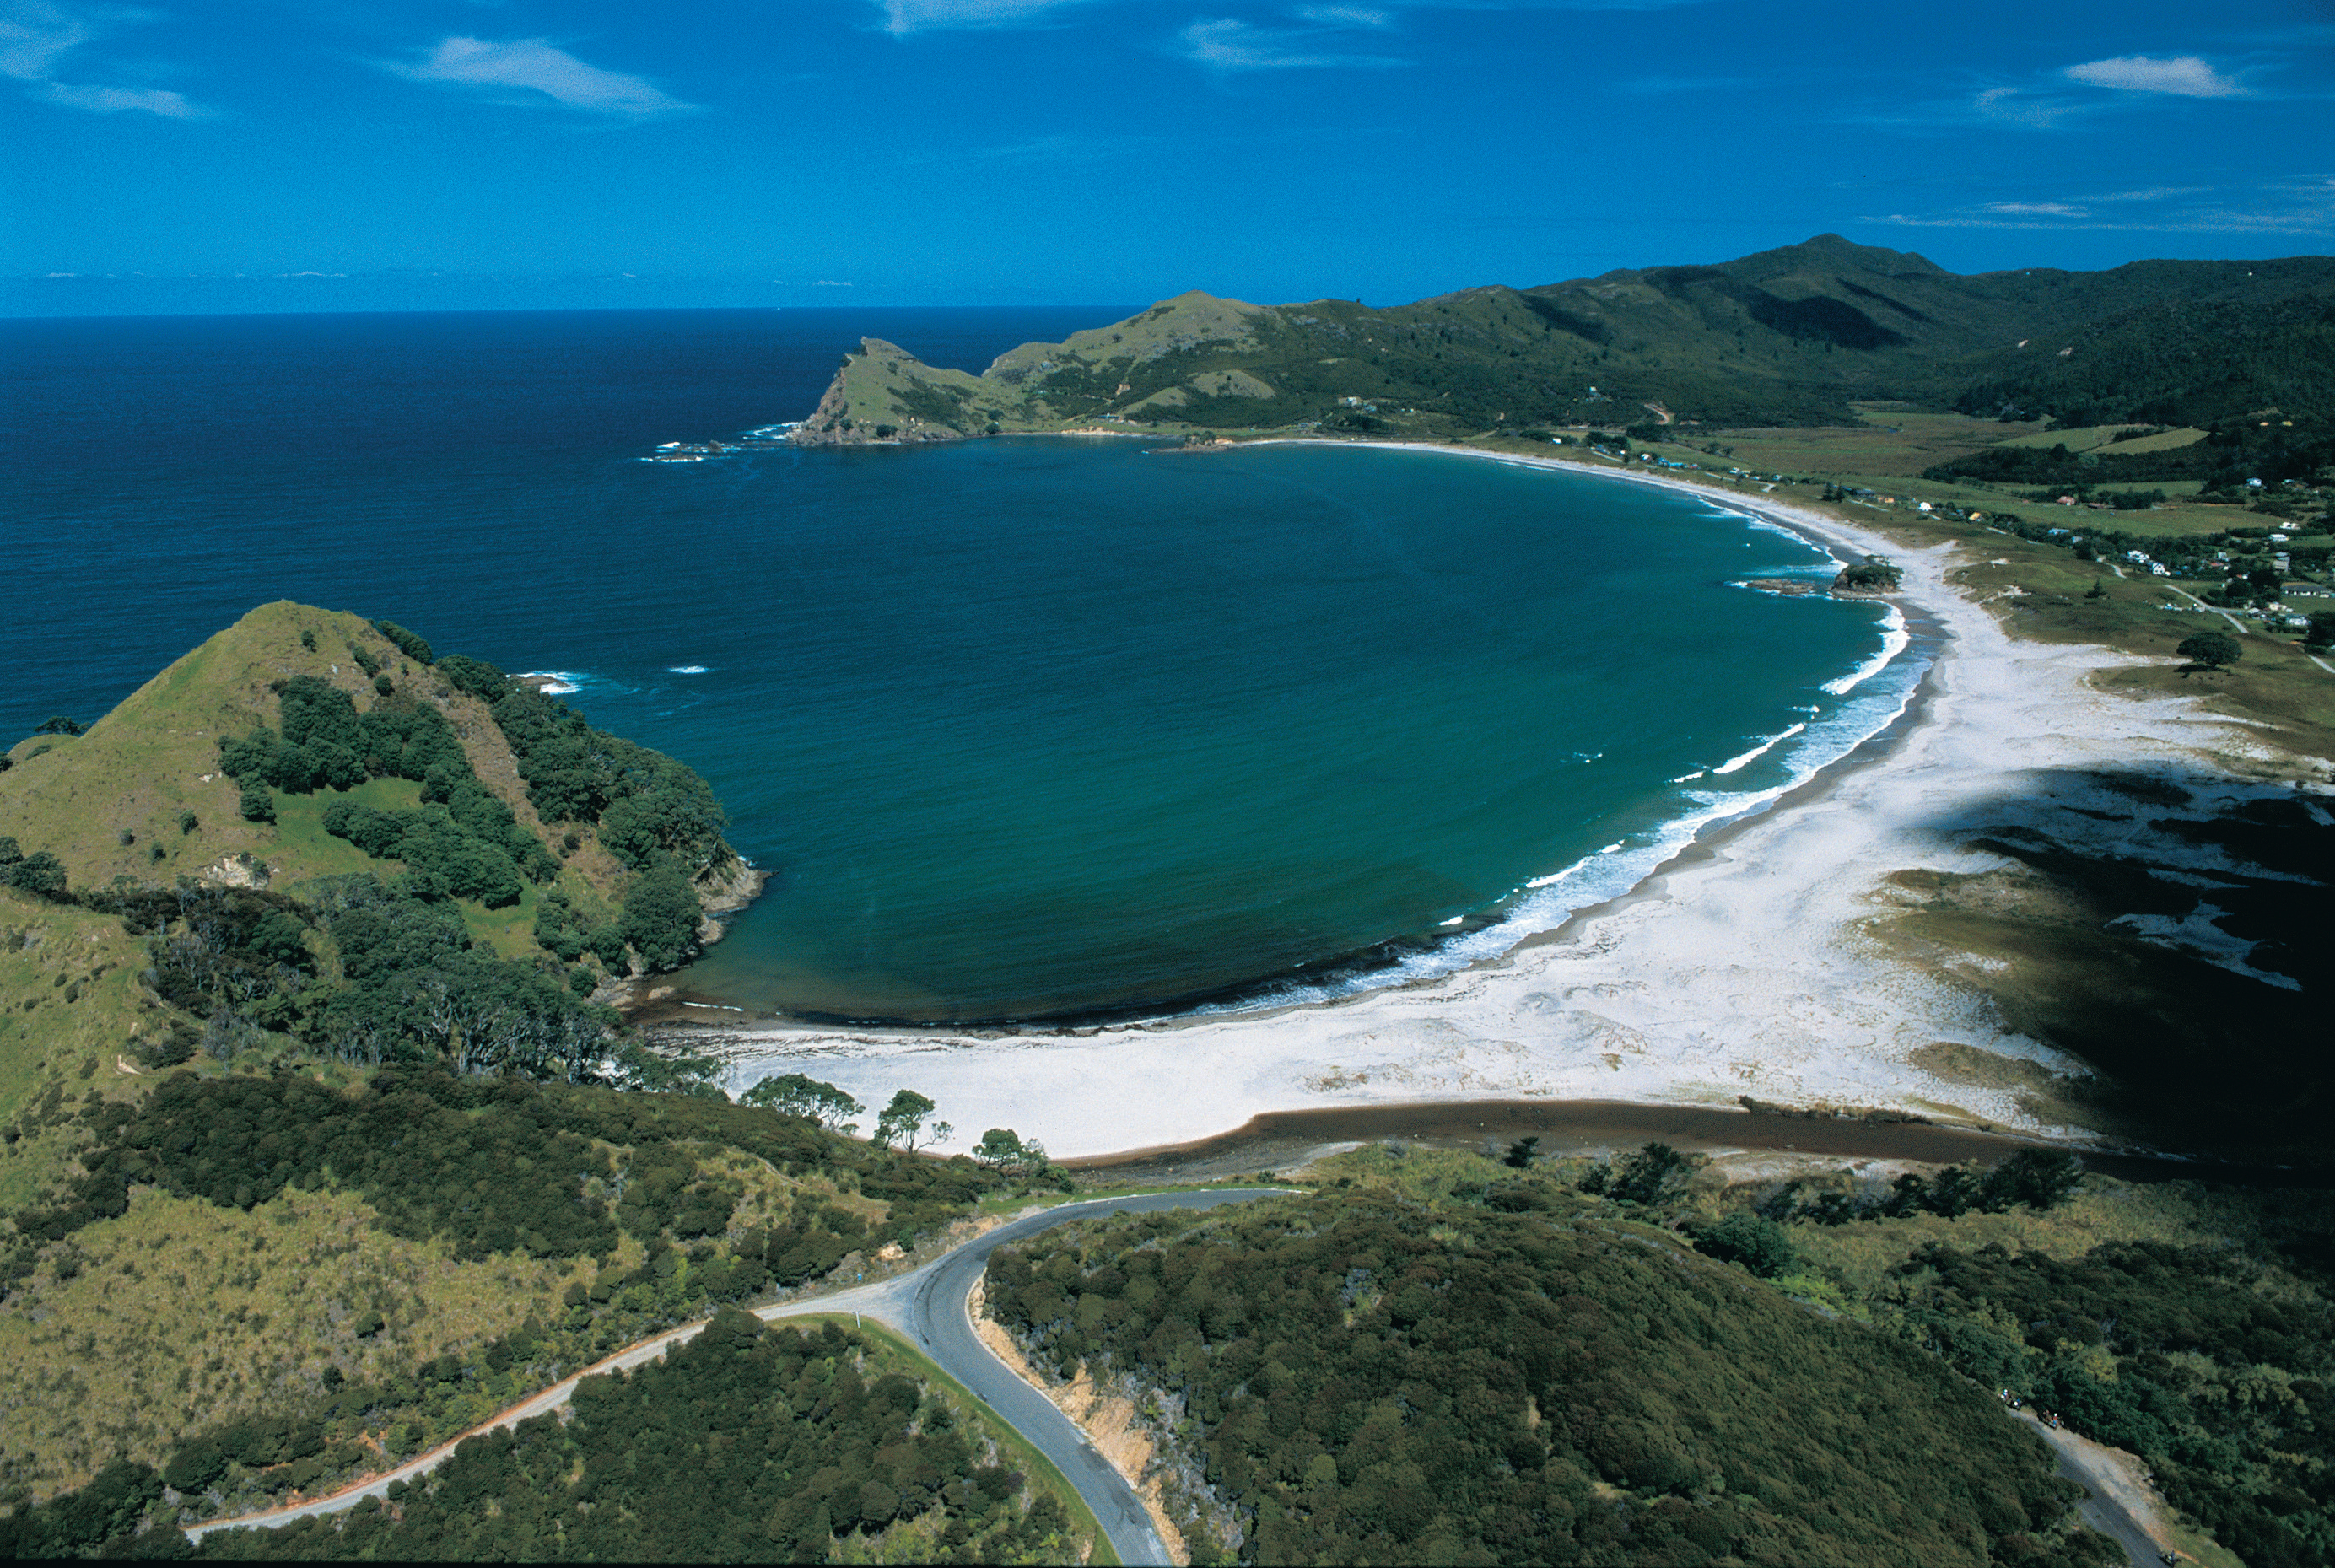 Aerial photo of the length of Medlands Beach and Oruawharo Bay, Great Barrier Island.